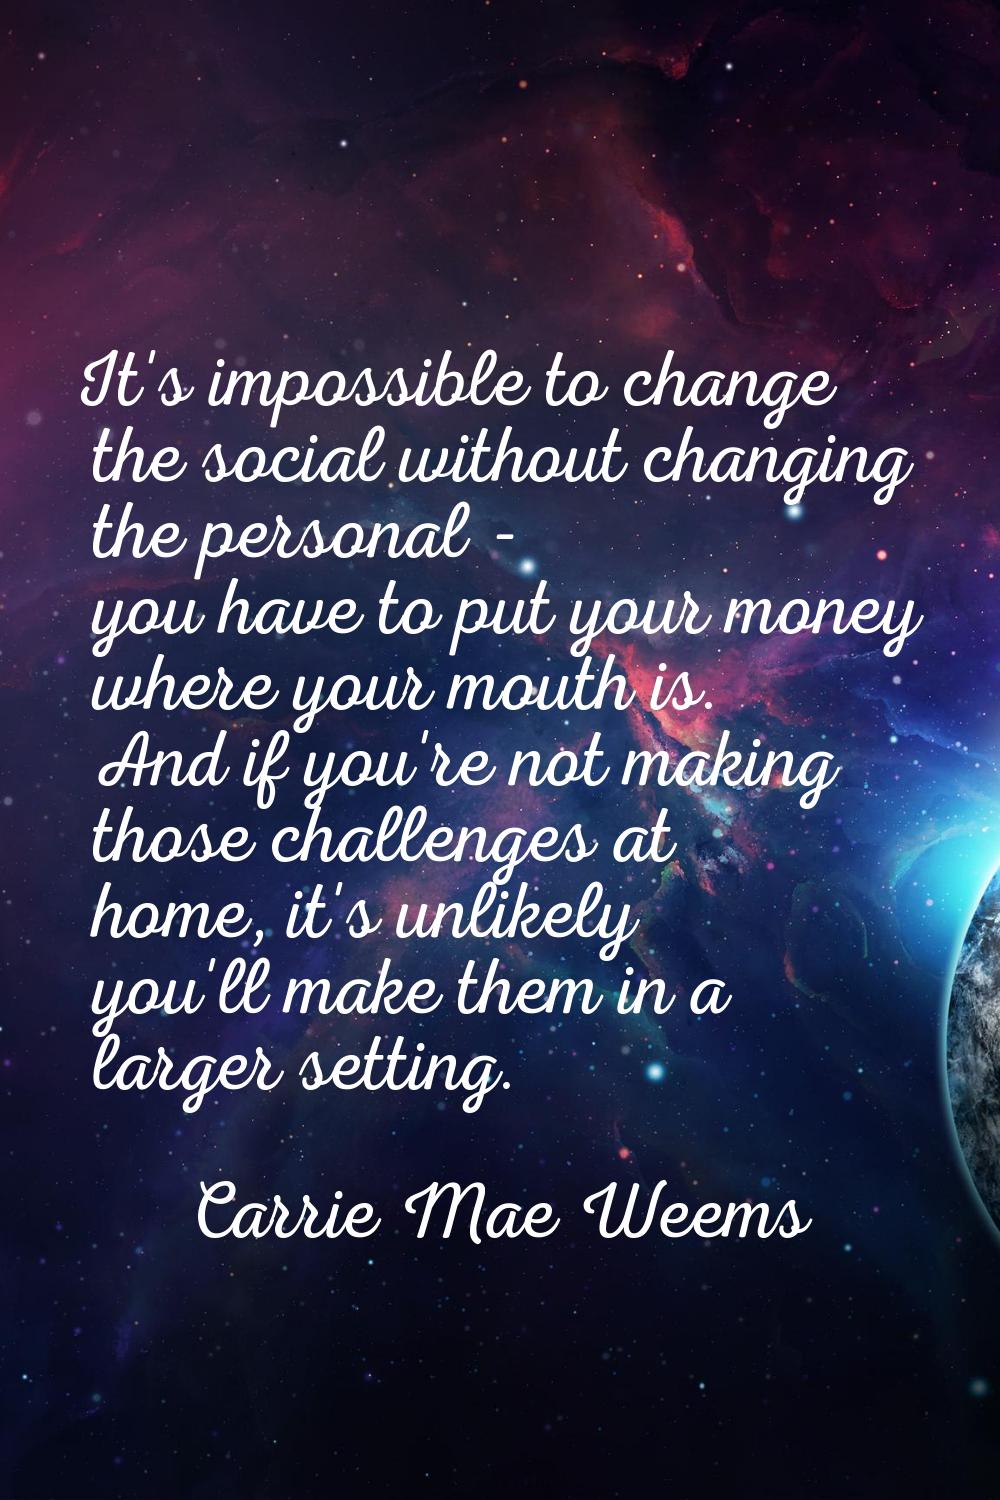 It's impossible to change the social without changing the personal - you have to put your money whe